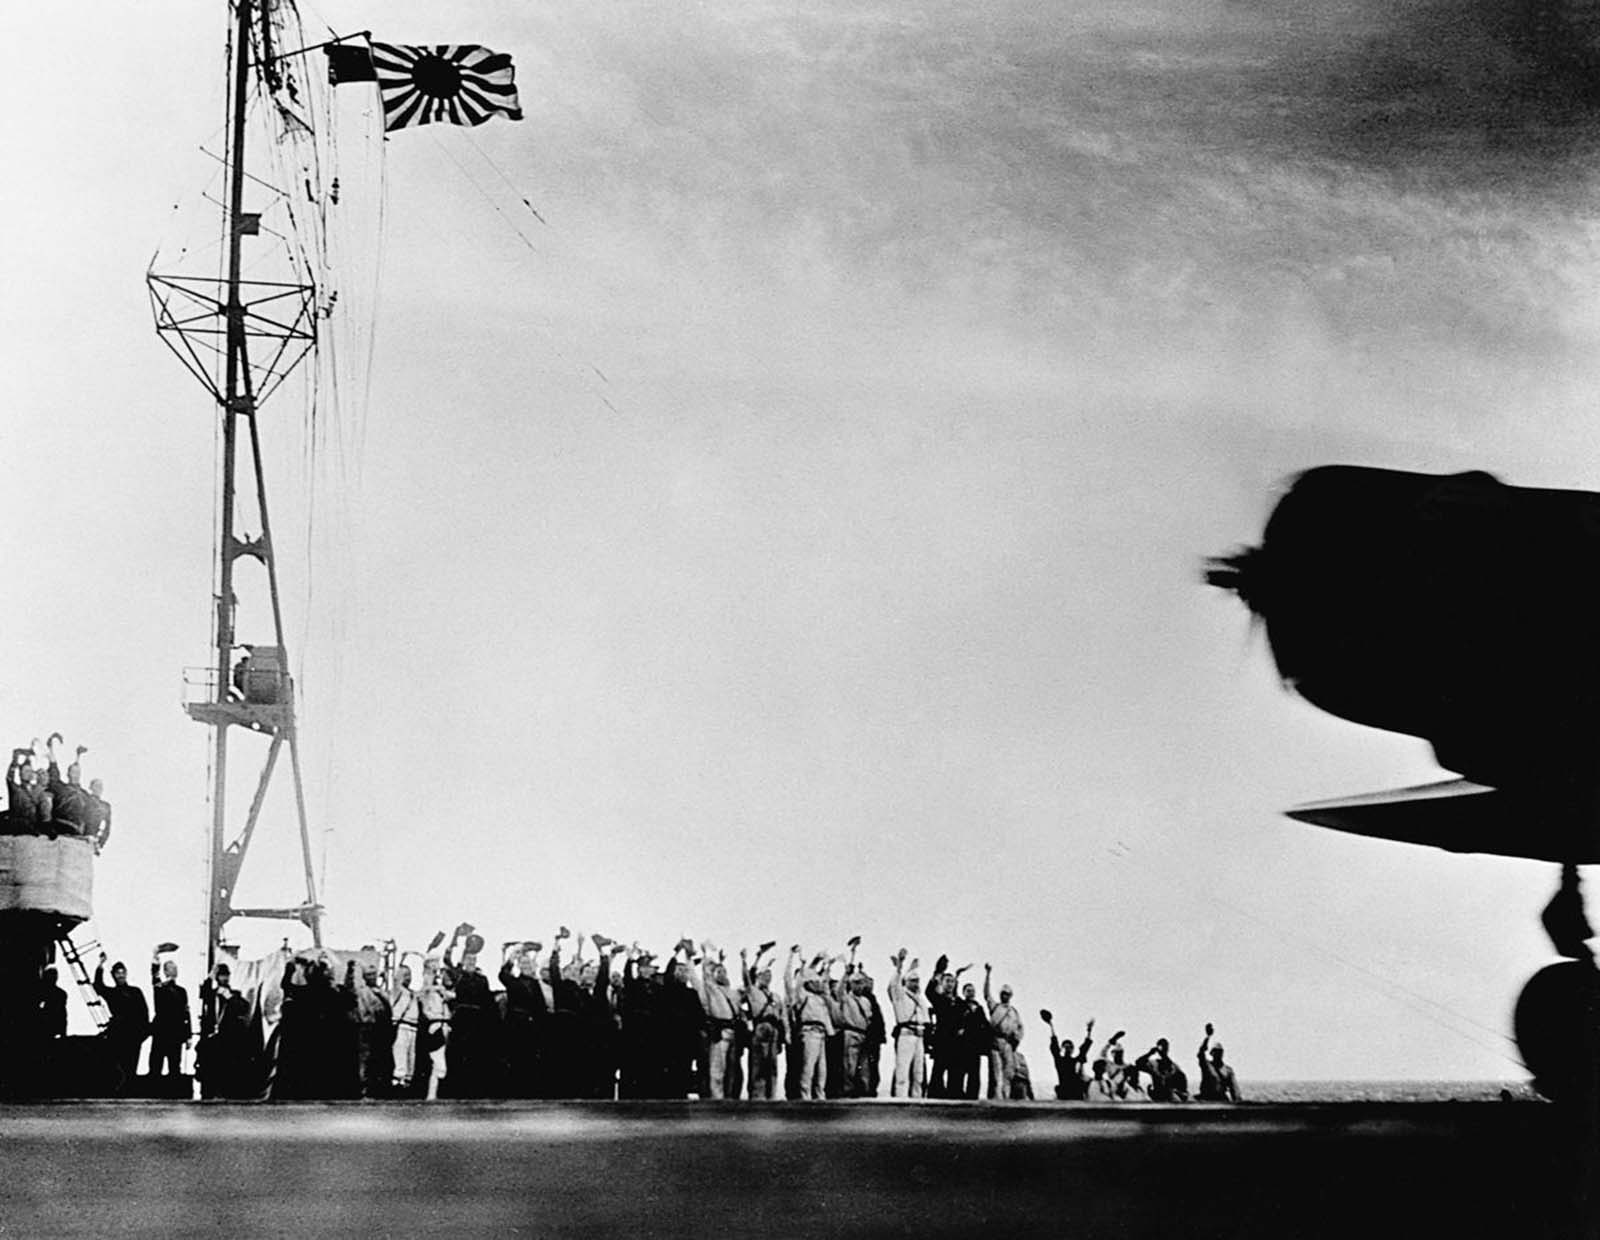 Sailors cheer as planes take off from a carrier to attack Pearl Harbor.